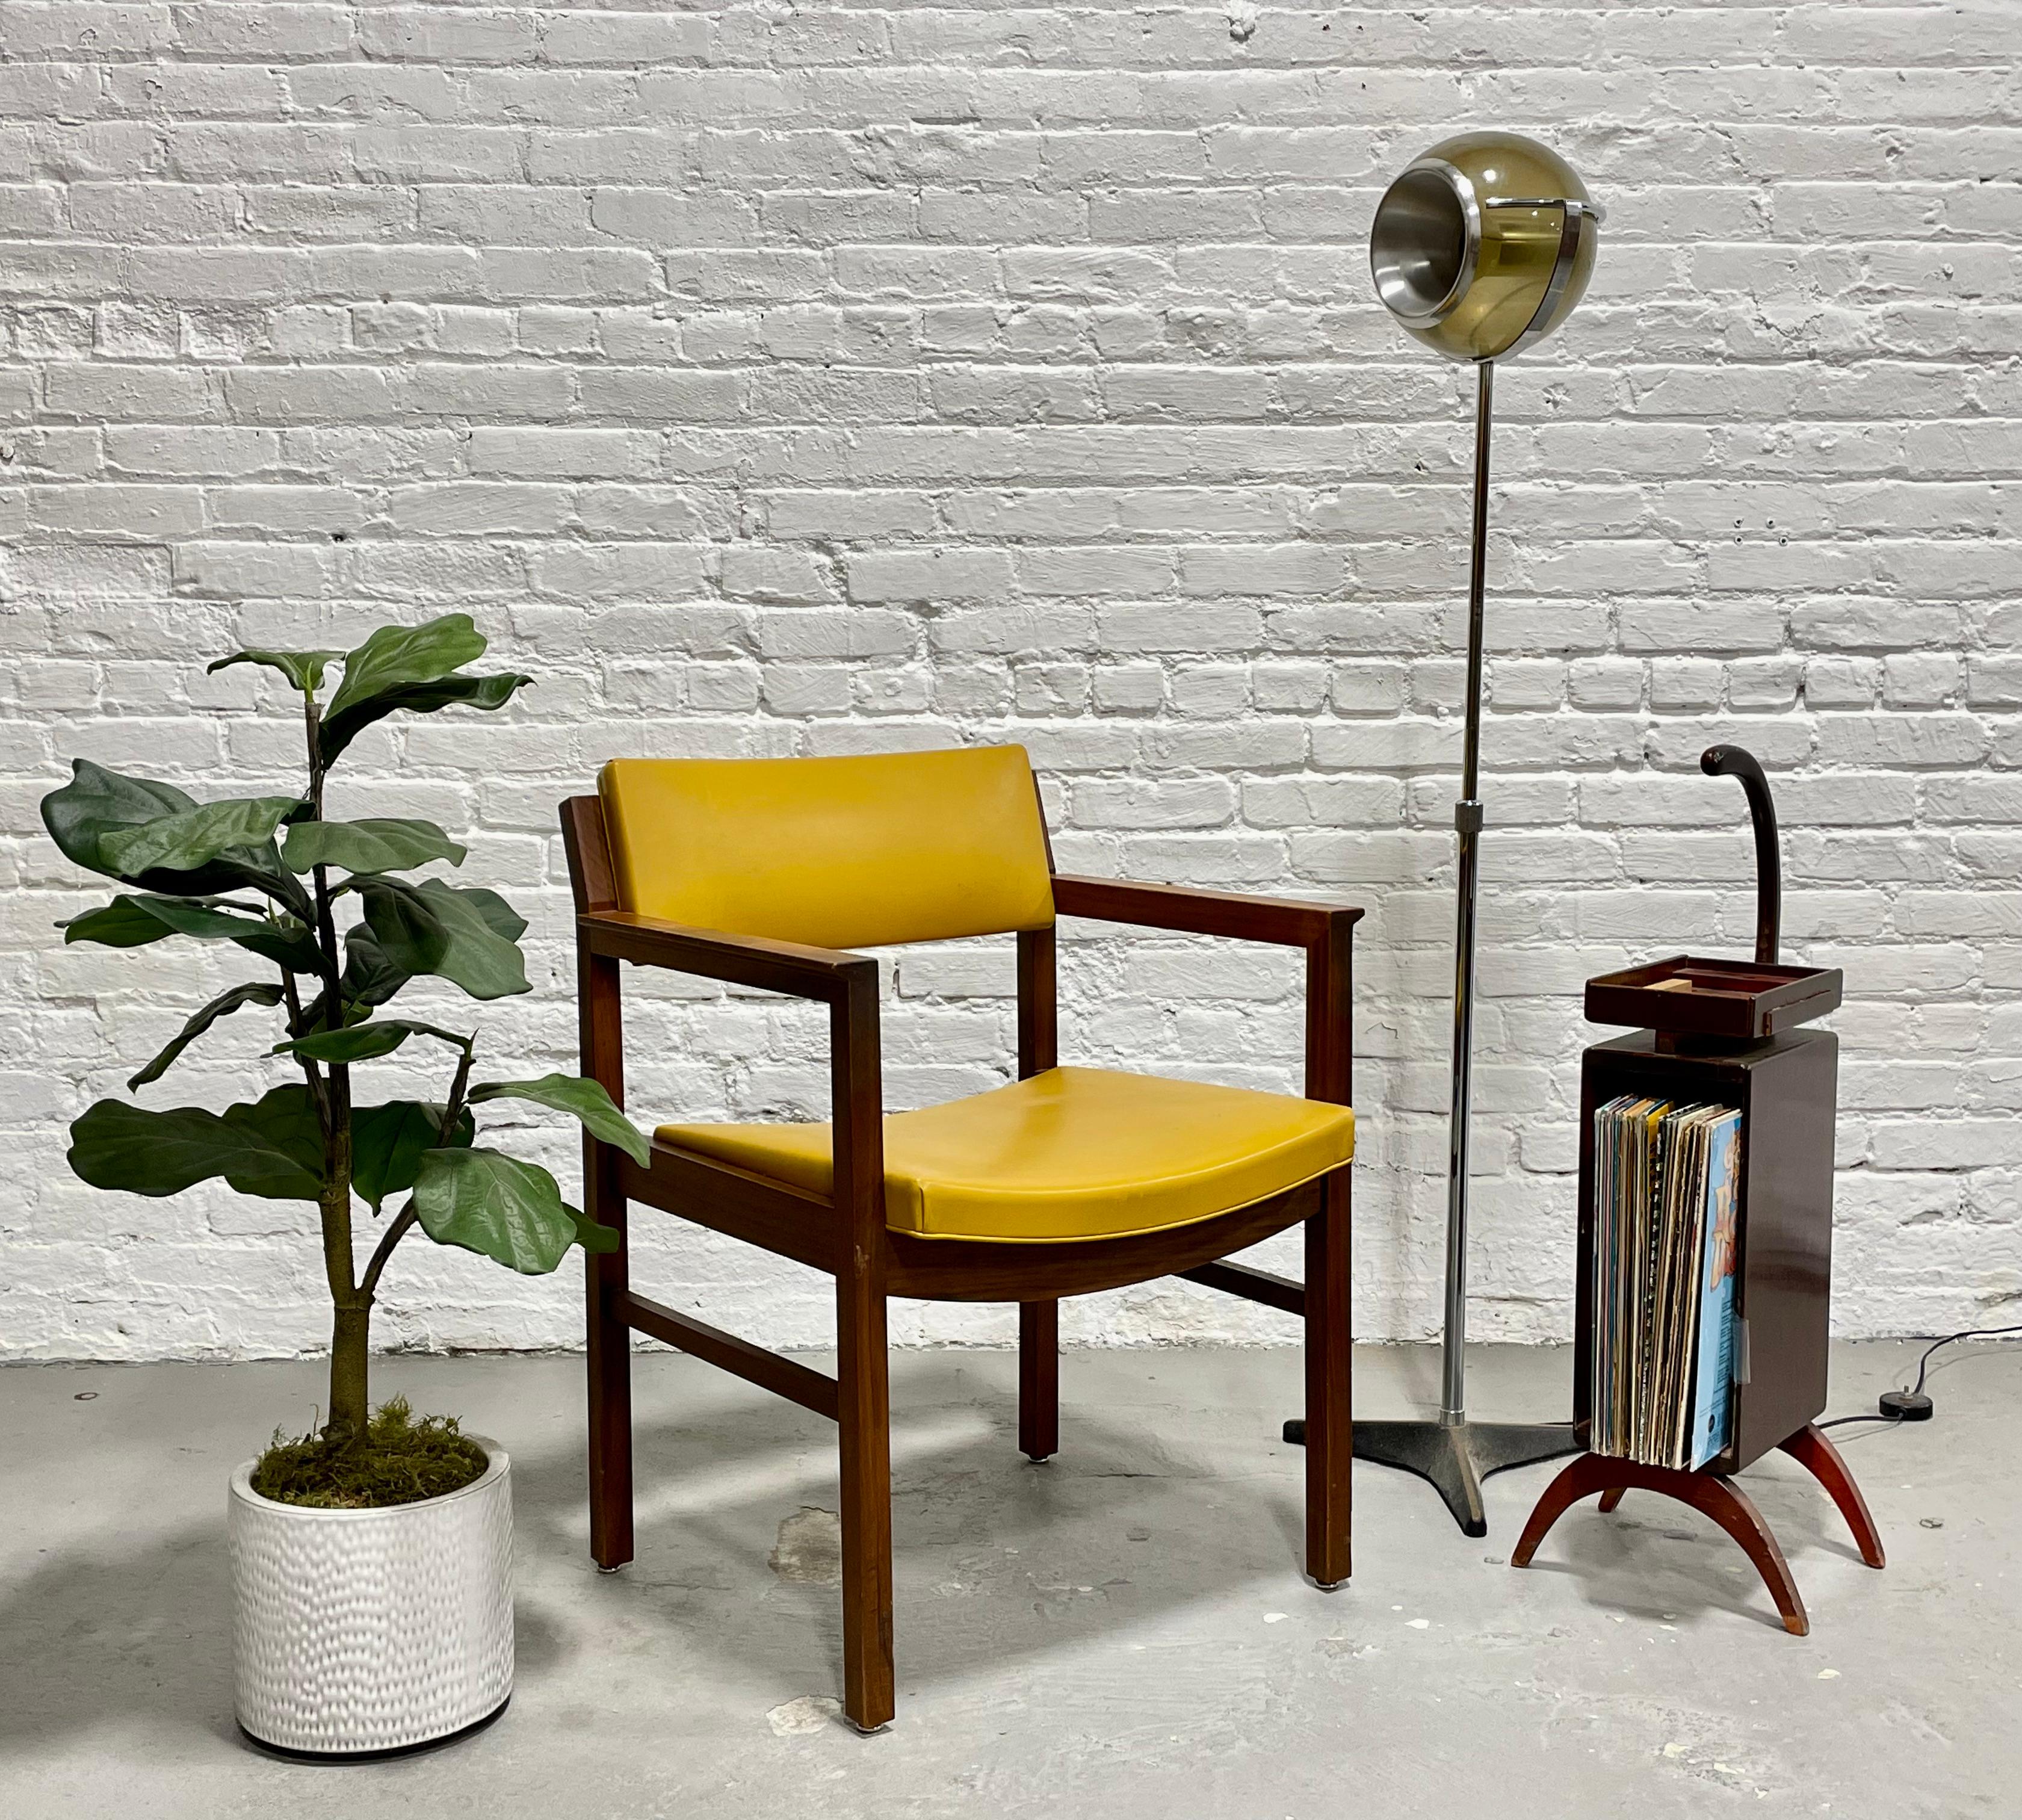 Walnut Mid-Century Modern Armchair by Ebena LaSalle of Montreal, circa 1960s. Well made from solid walnut contrasted with a pineapple yellow vinyl upholstery. Simple, modern design with flared arm rests and as lovely from the back as it is from the